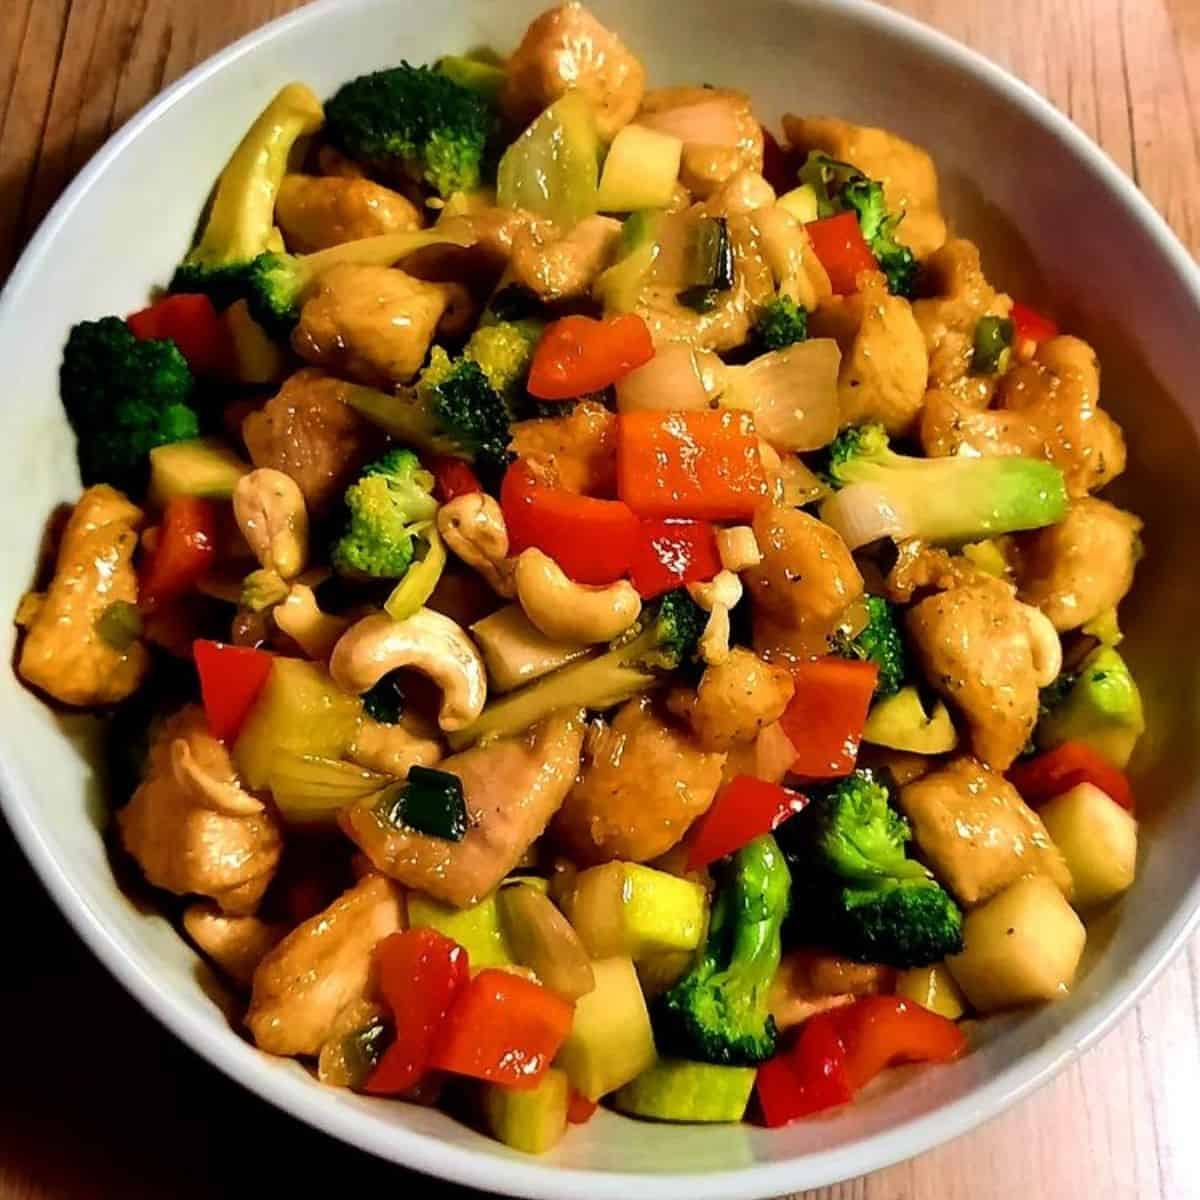 Chinese fried chicken with veggies